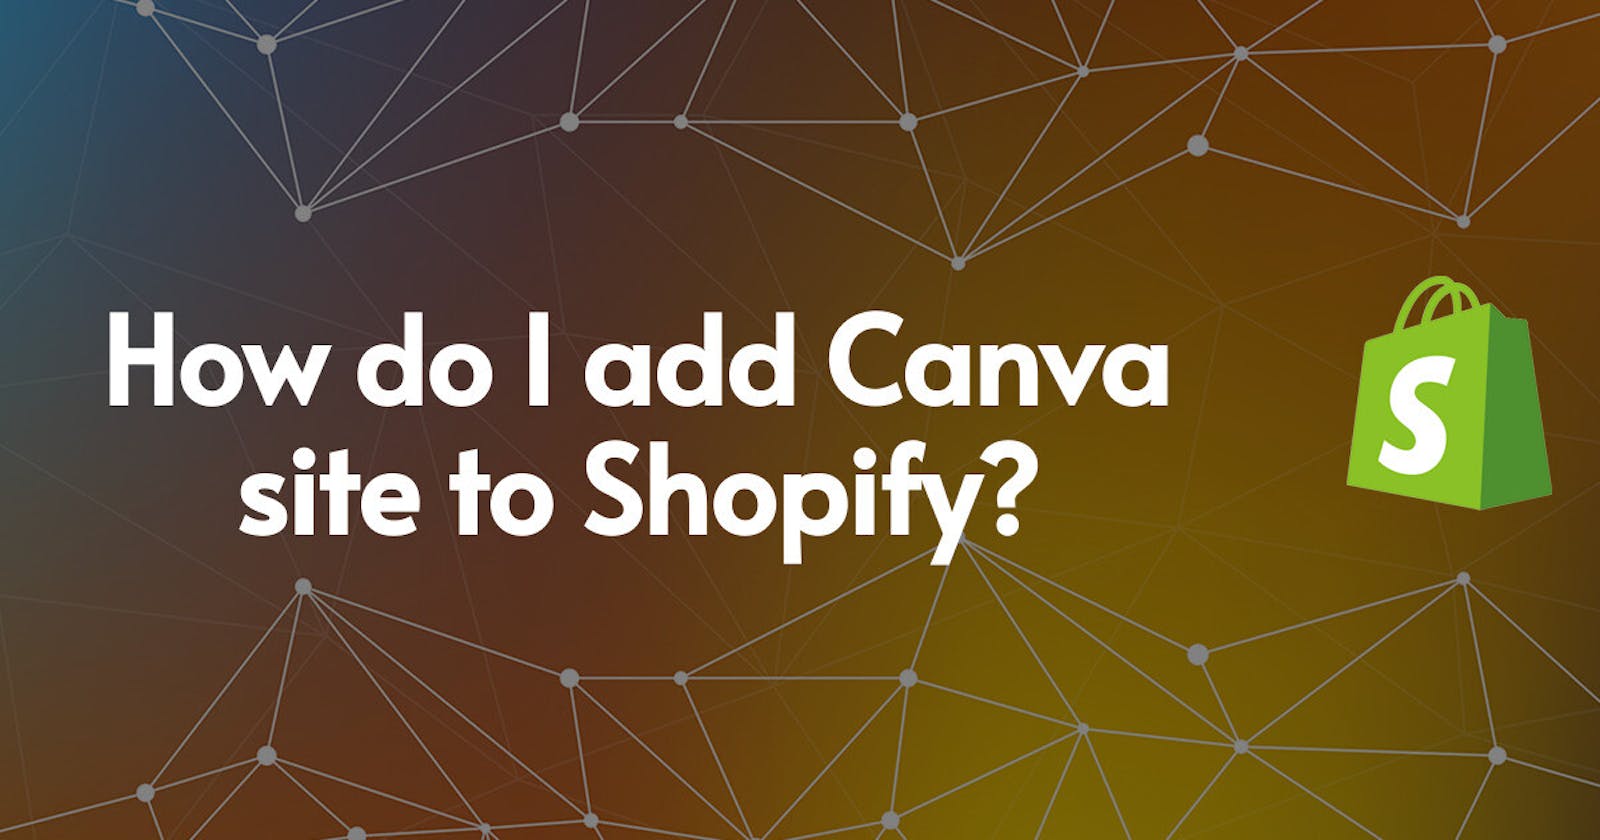 How do I add Canva site to Shopify?